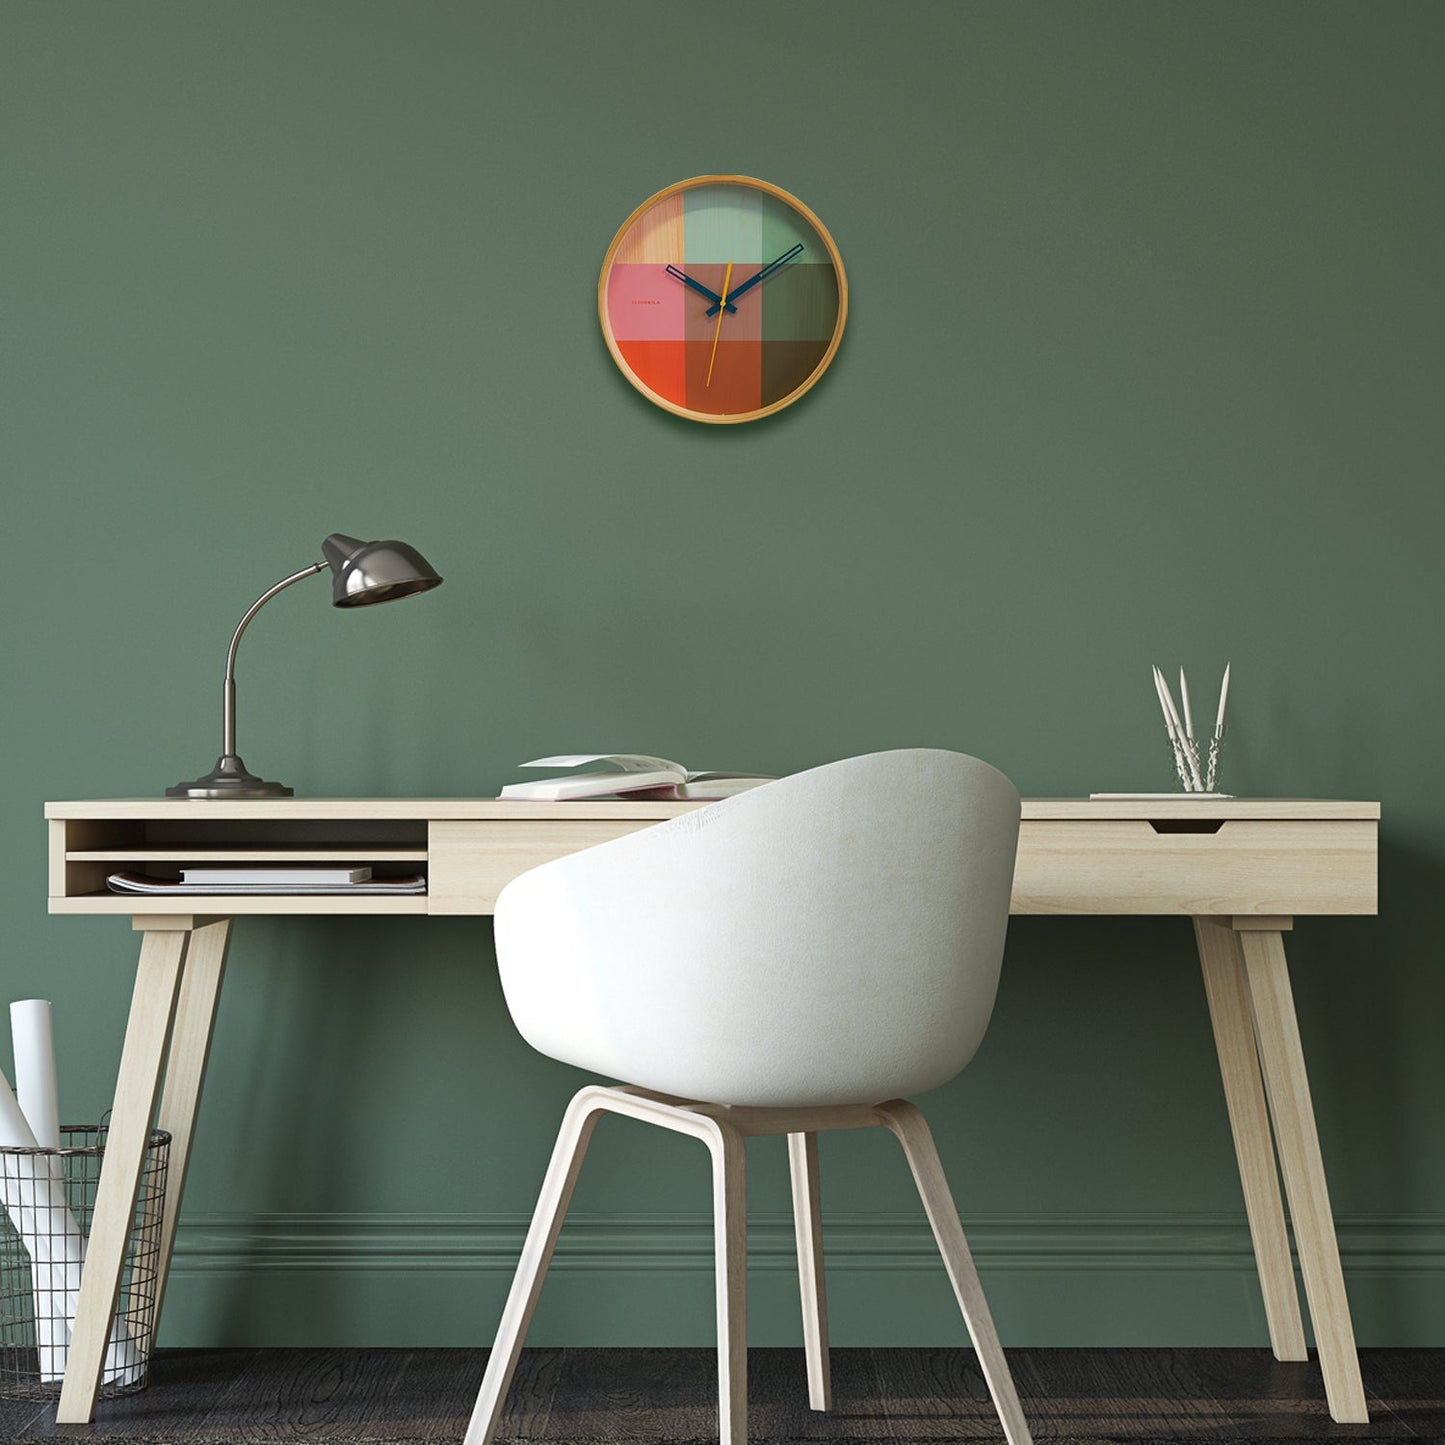 SAMPLE -  Riso Green & Pink Wall Clock - Wooden Casing - Artistic Timepiece